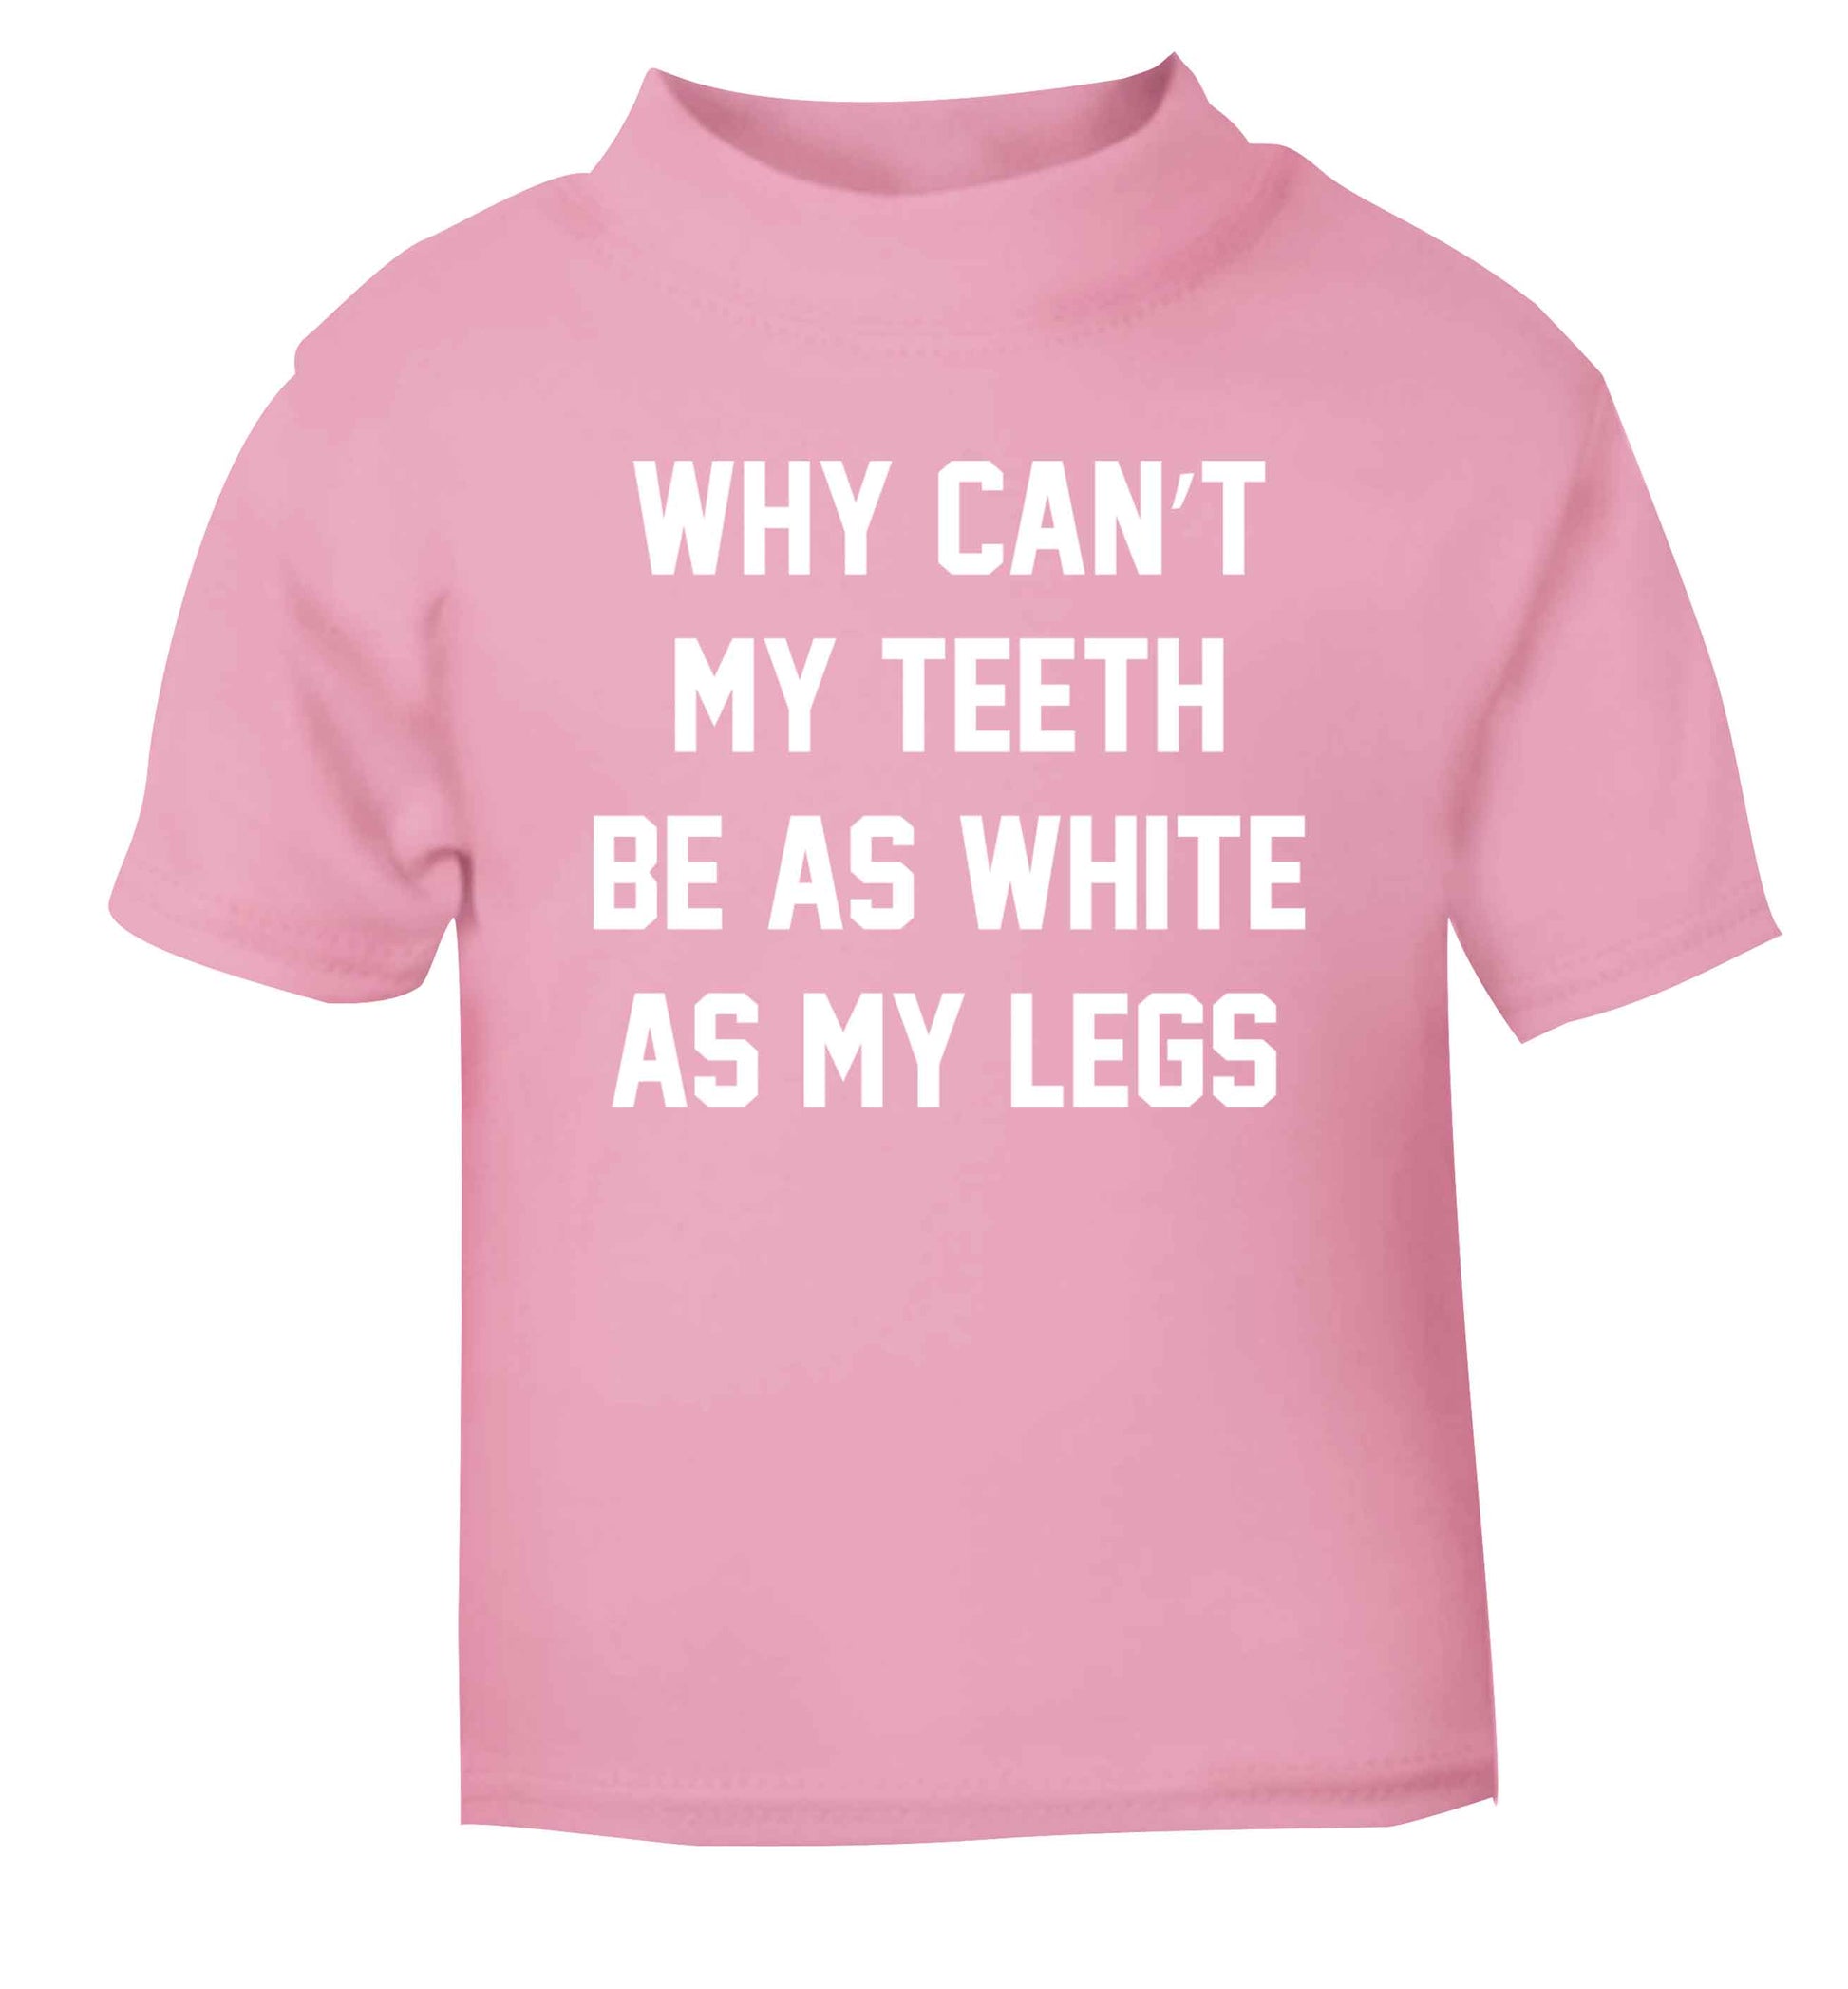 Why can't my teeth be as white as my legs light pink Baby Toddler Tshirt 2 Years